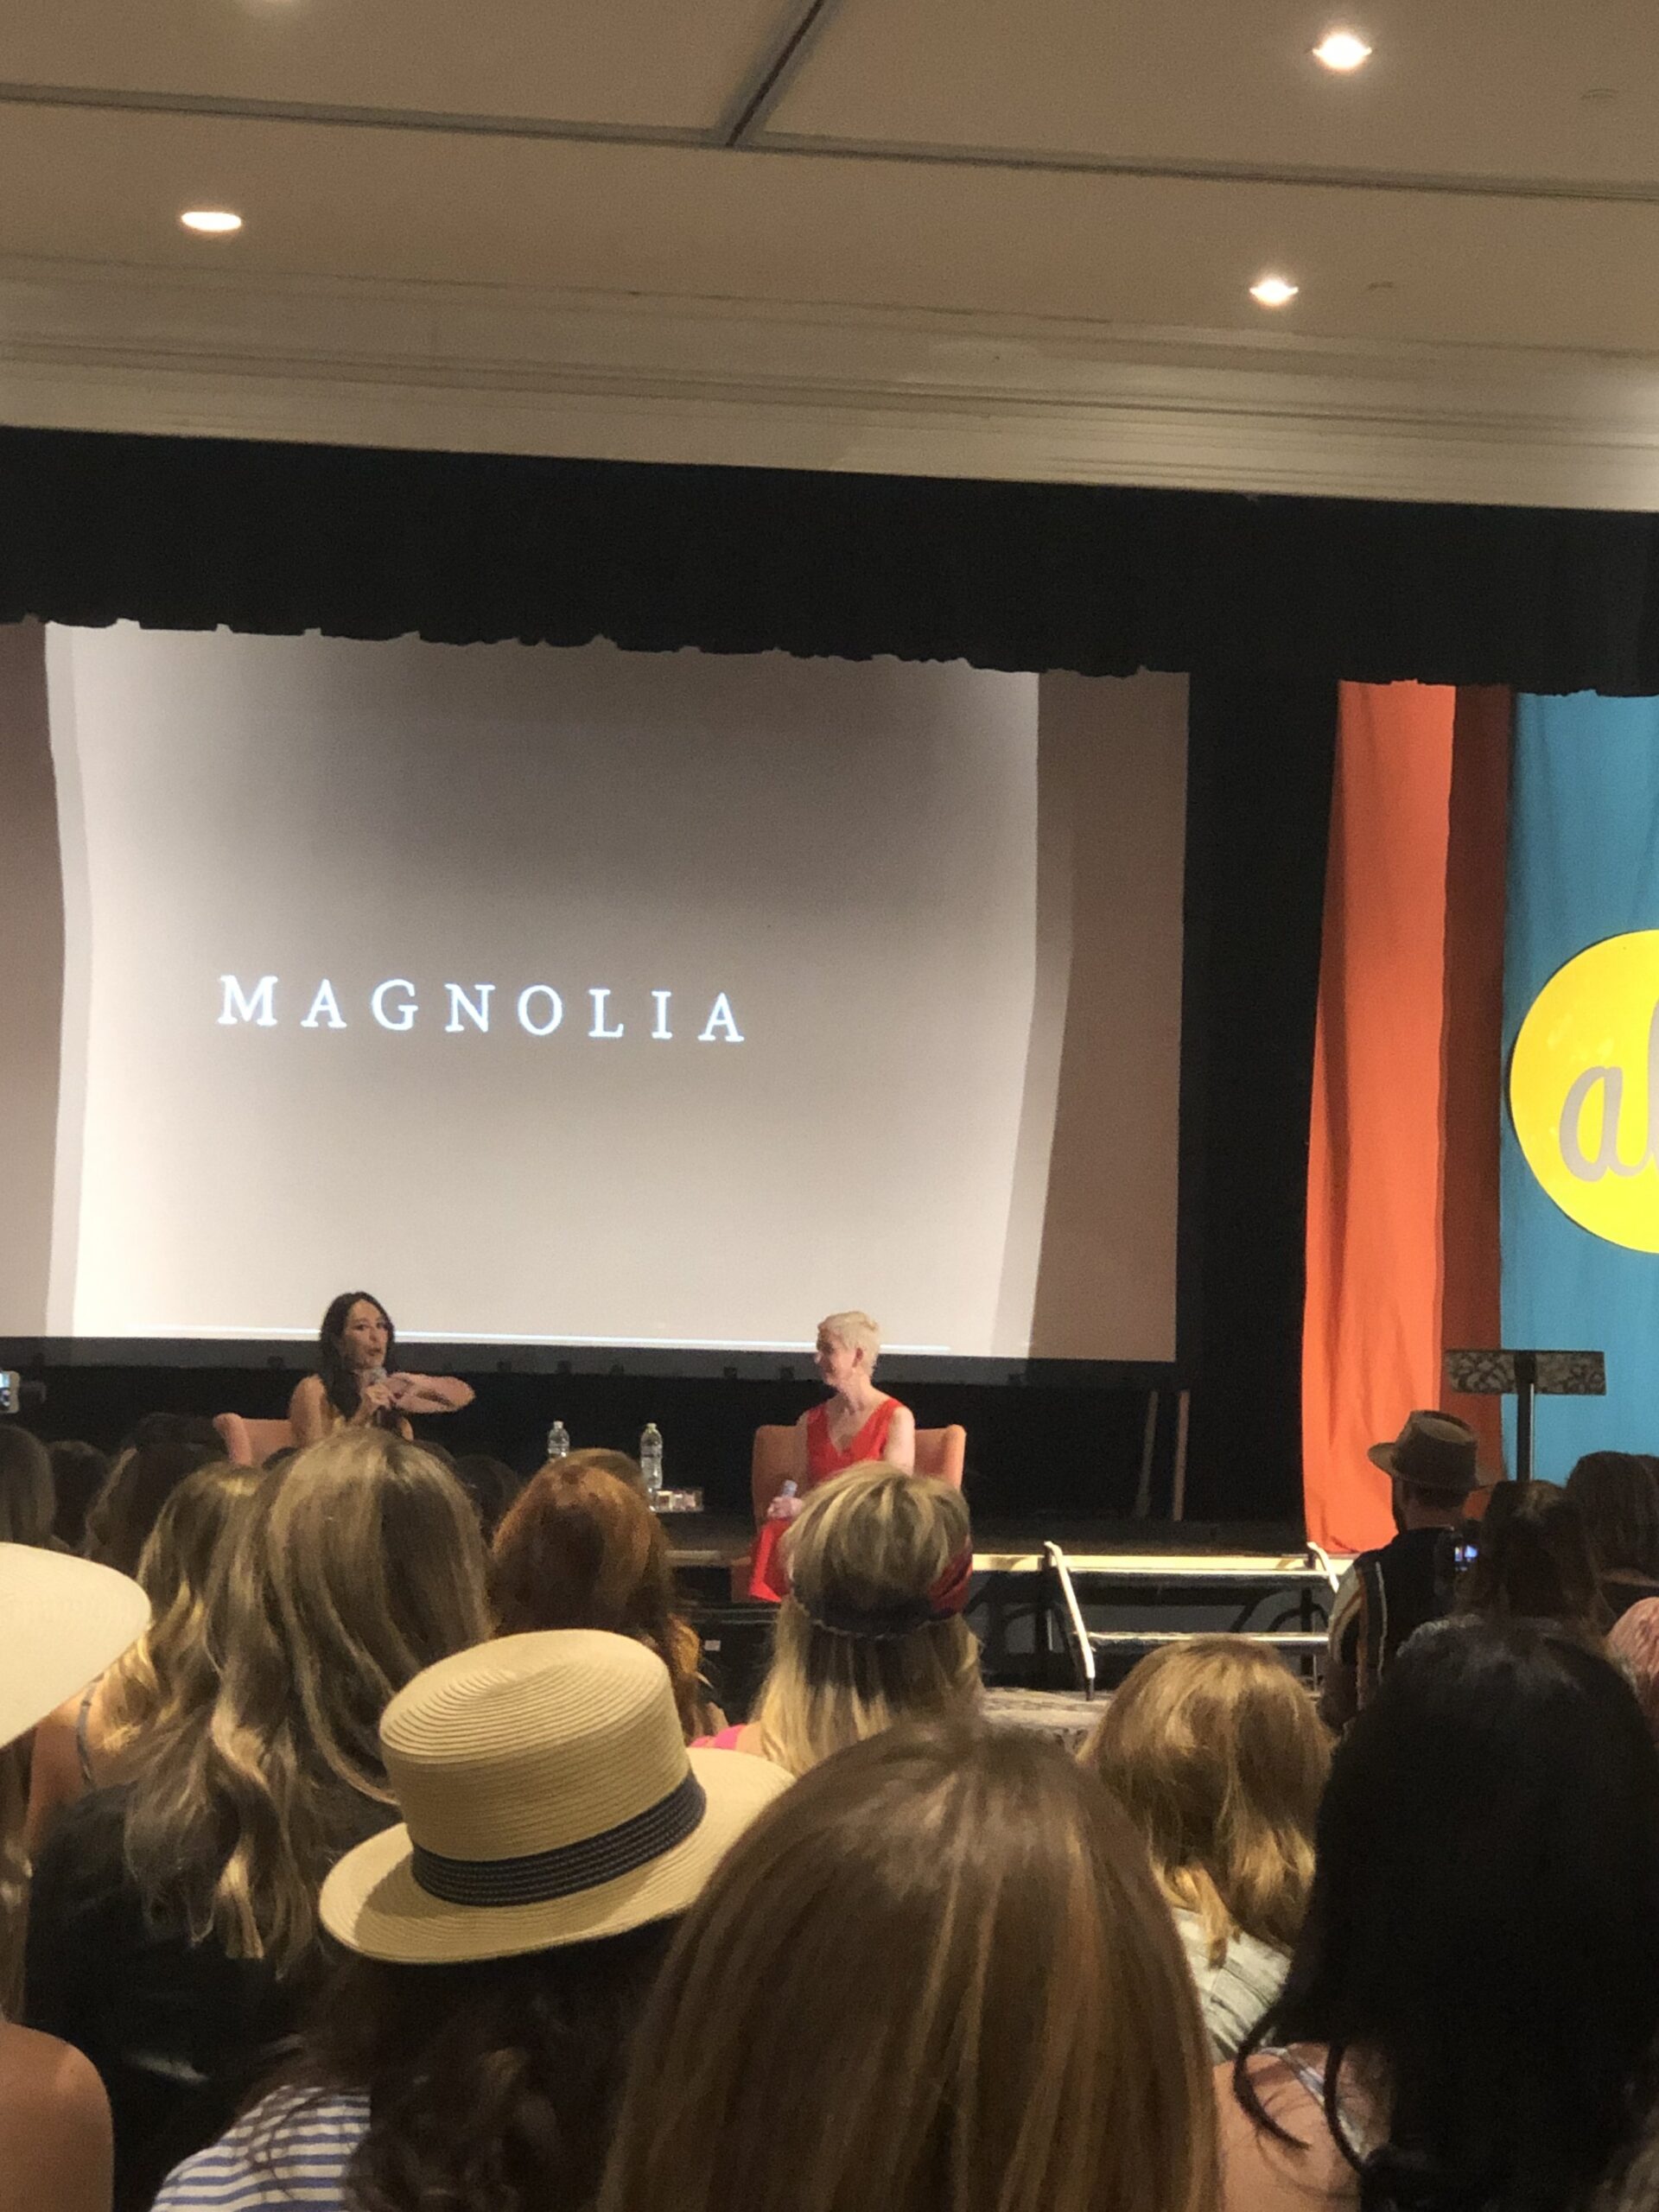 It was so inspiring to hear Joanna Gaines (@joannagaines) chat with the founder of Alt Summit, Gabrielle Blair (@designmom).